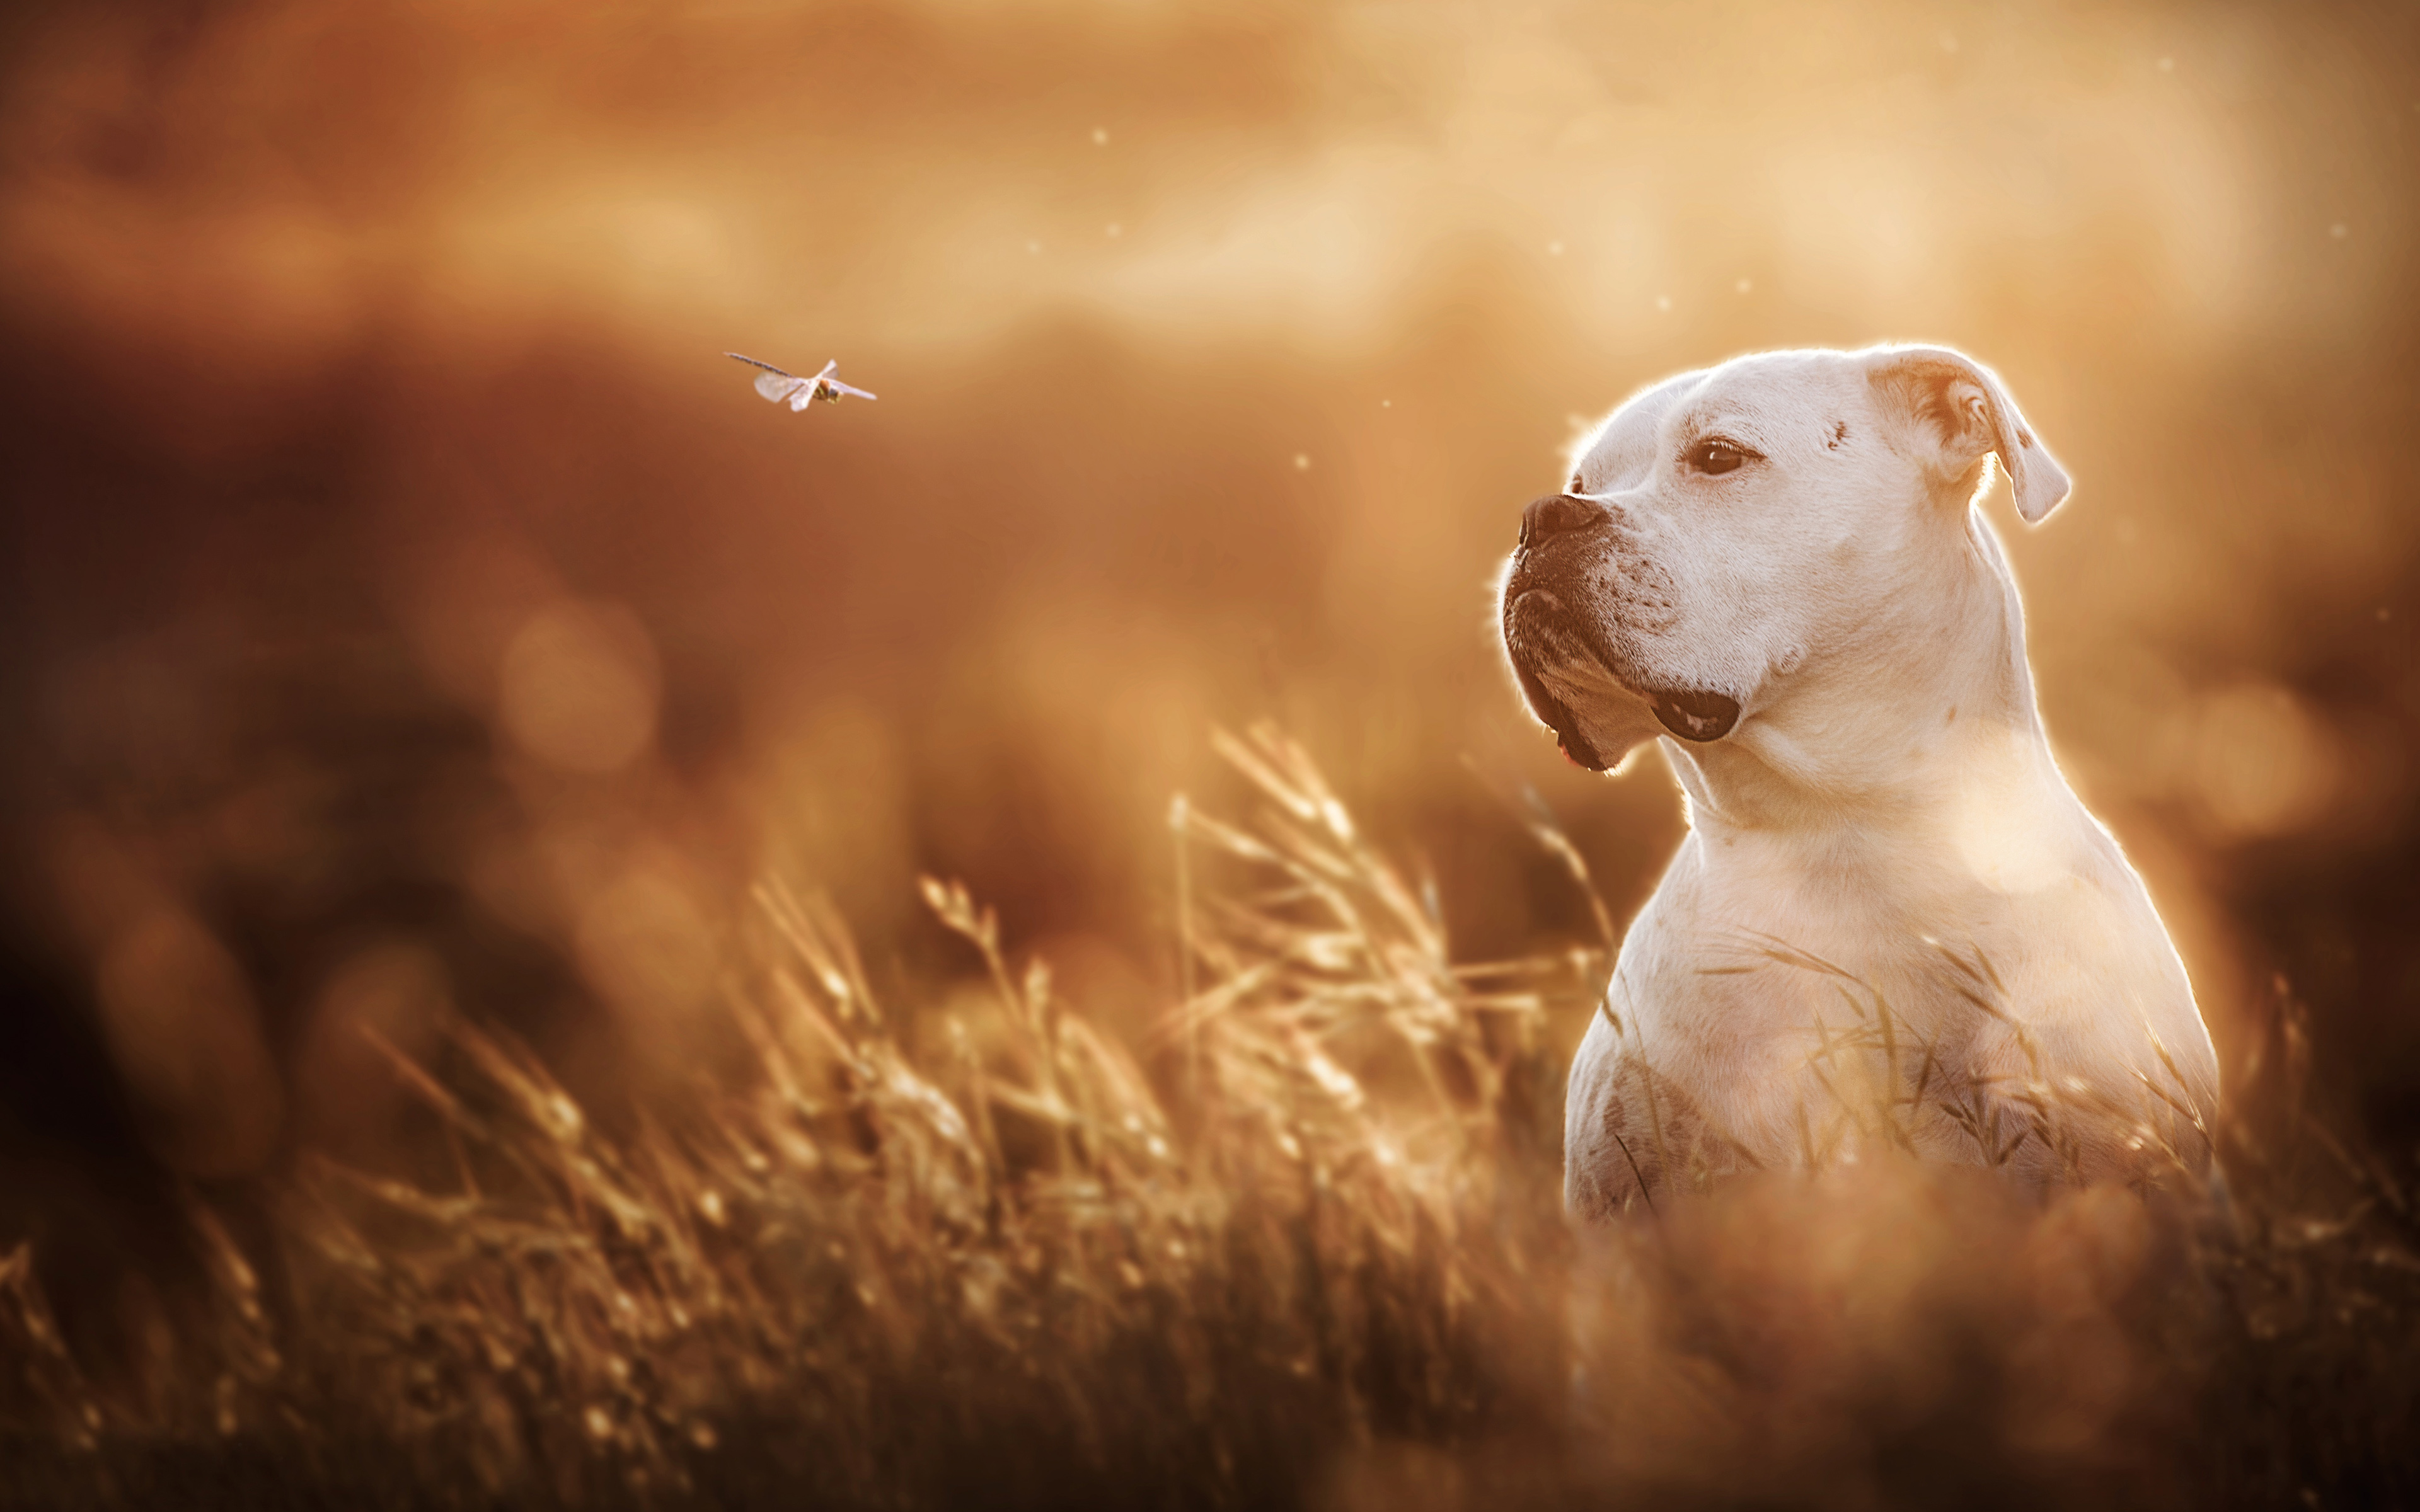 Download wallpapers Pit Bull Terrier, dogs, 4k, White pitbull, muzzle,  lawn, Pit Bull, pets, Pit Bull Dog for desktop with resolution 3840x2400.  High Quality HD pictures wallpapers